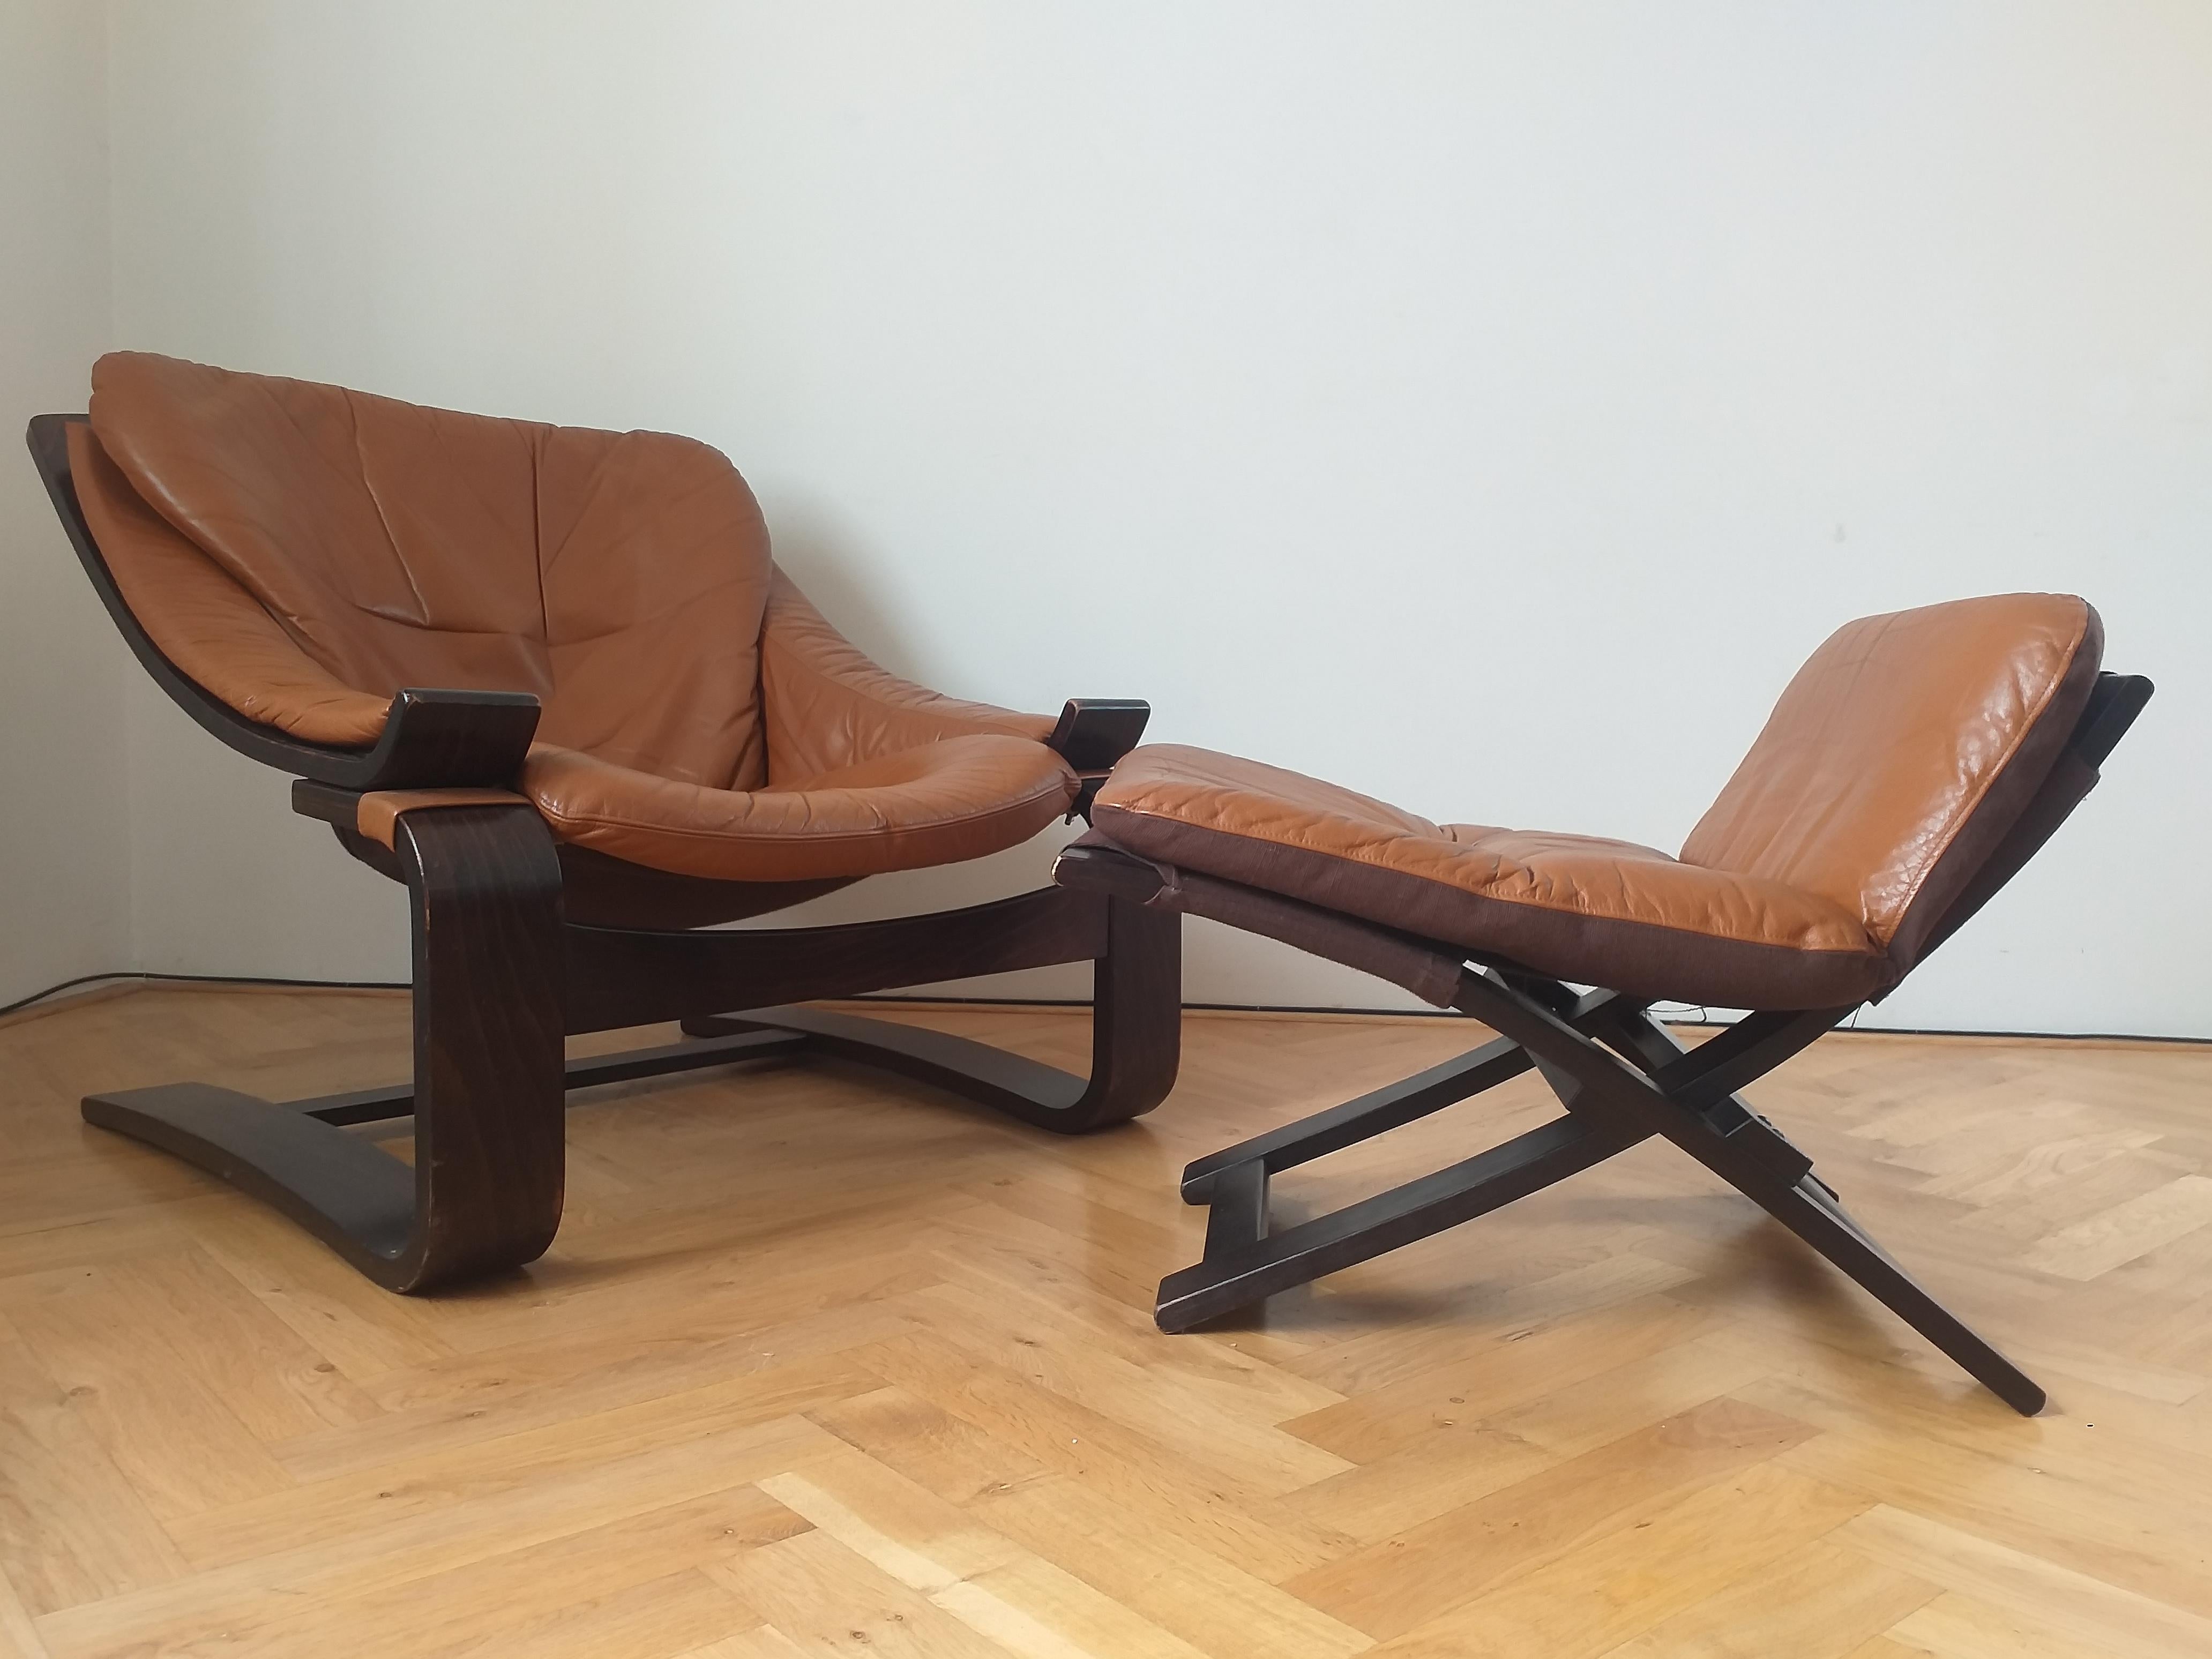 Mid-Century Modern Midcentury Lounge Chair Kroken with Ottoman, Ake Fribytter, Nelo, Sweden, 1970s For Sale